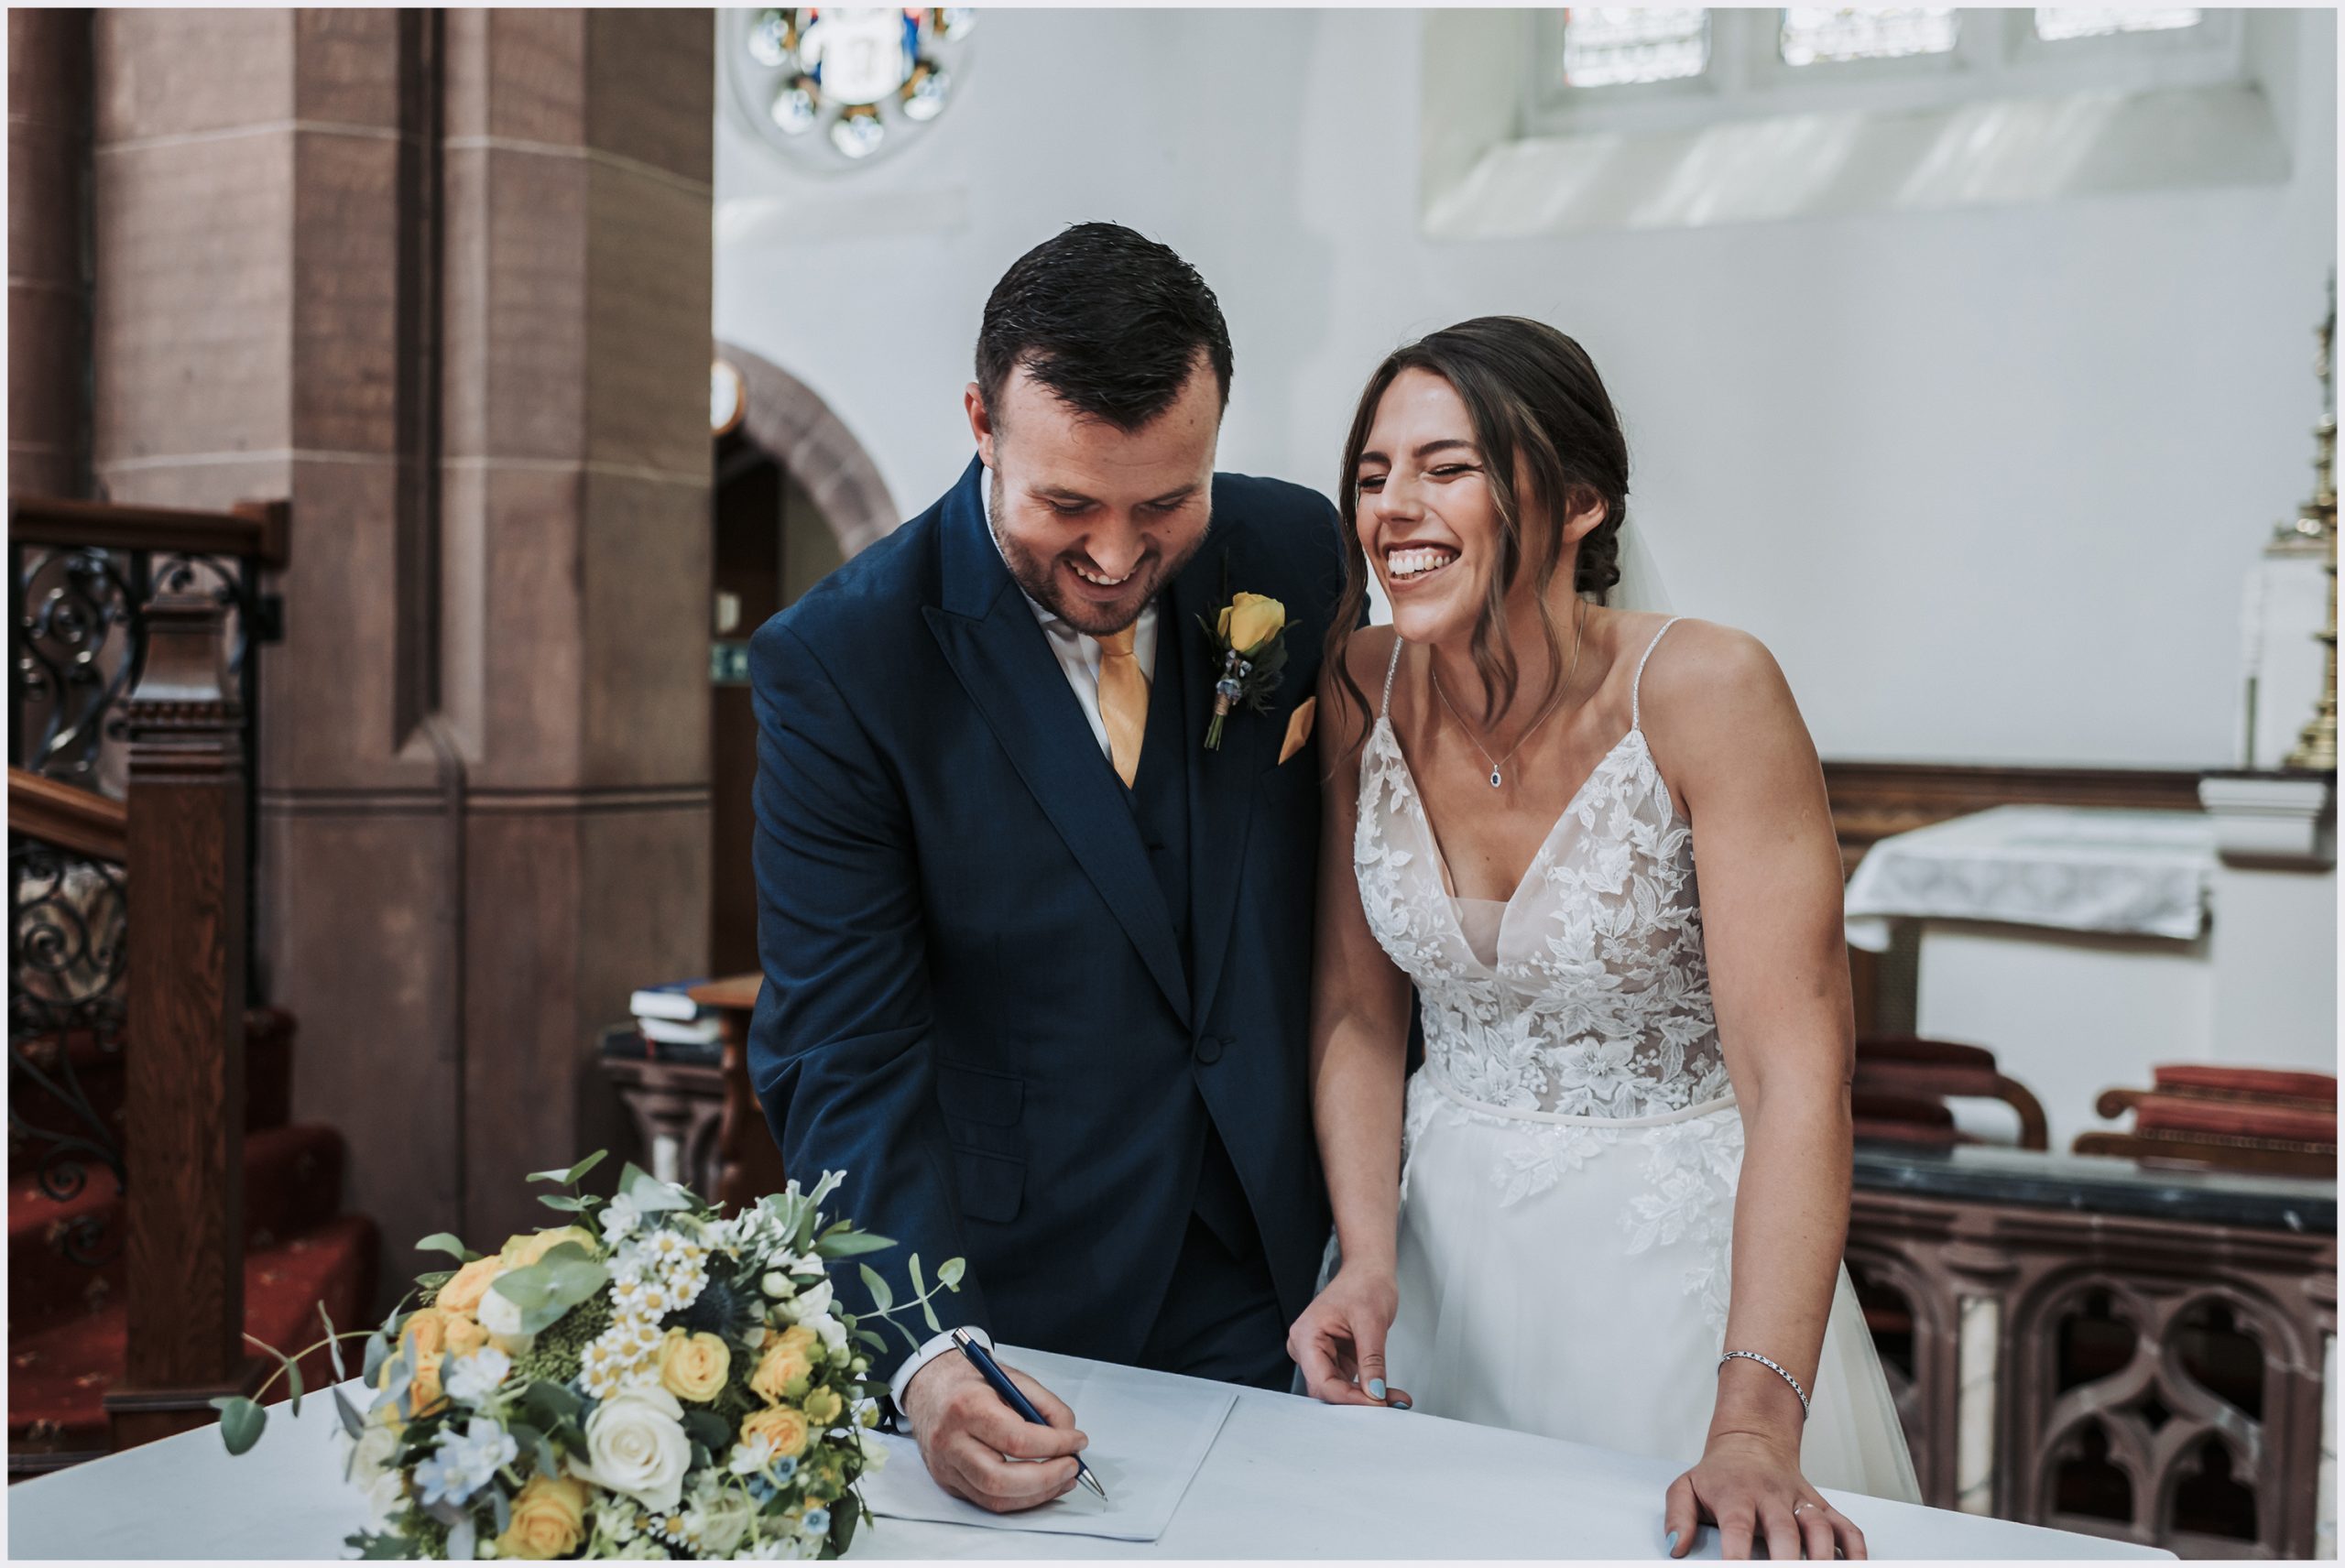 A bride and groom giggle as they sign the register after their church wedding ceremony.  Image captured by North Wales wedding photographer Helena Jayne Photography